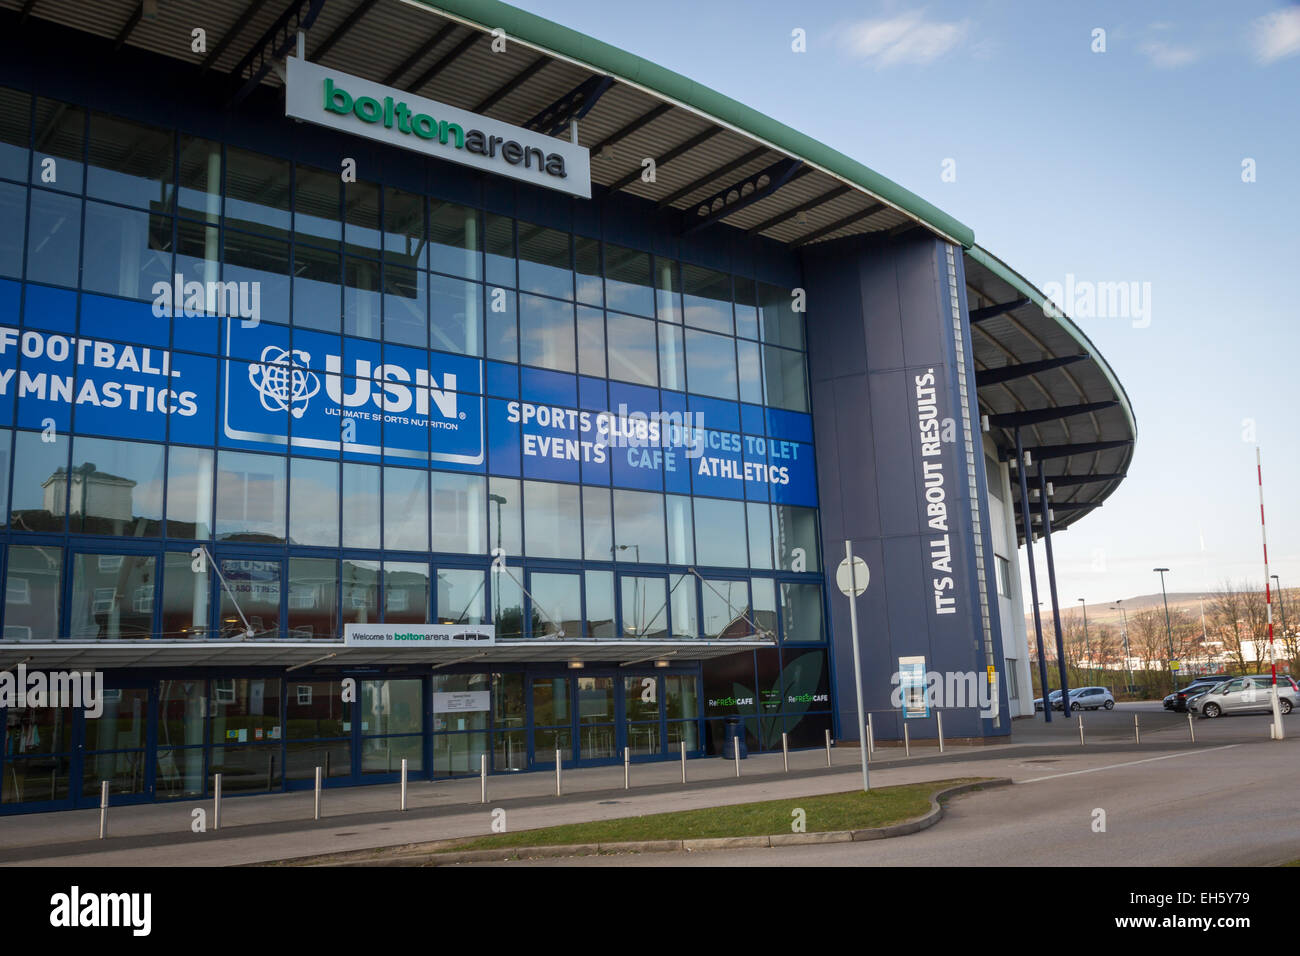 USN Bolton Arena at Middlebrook Retail Park, Horwich, Bolton Stock Photo